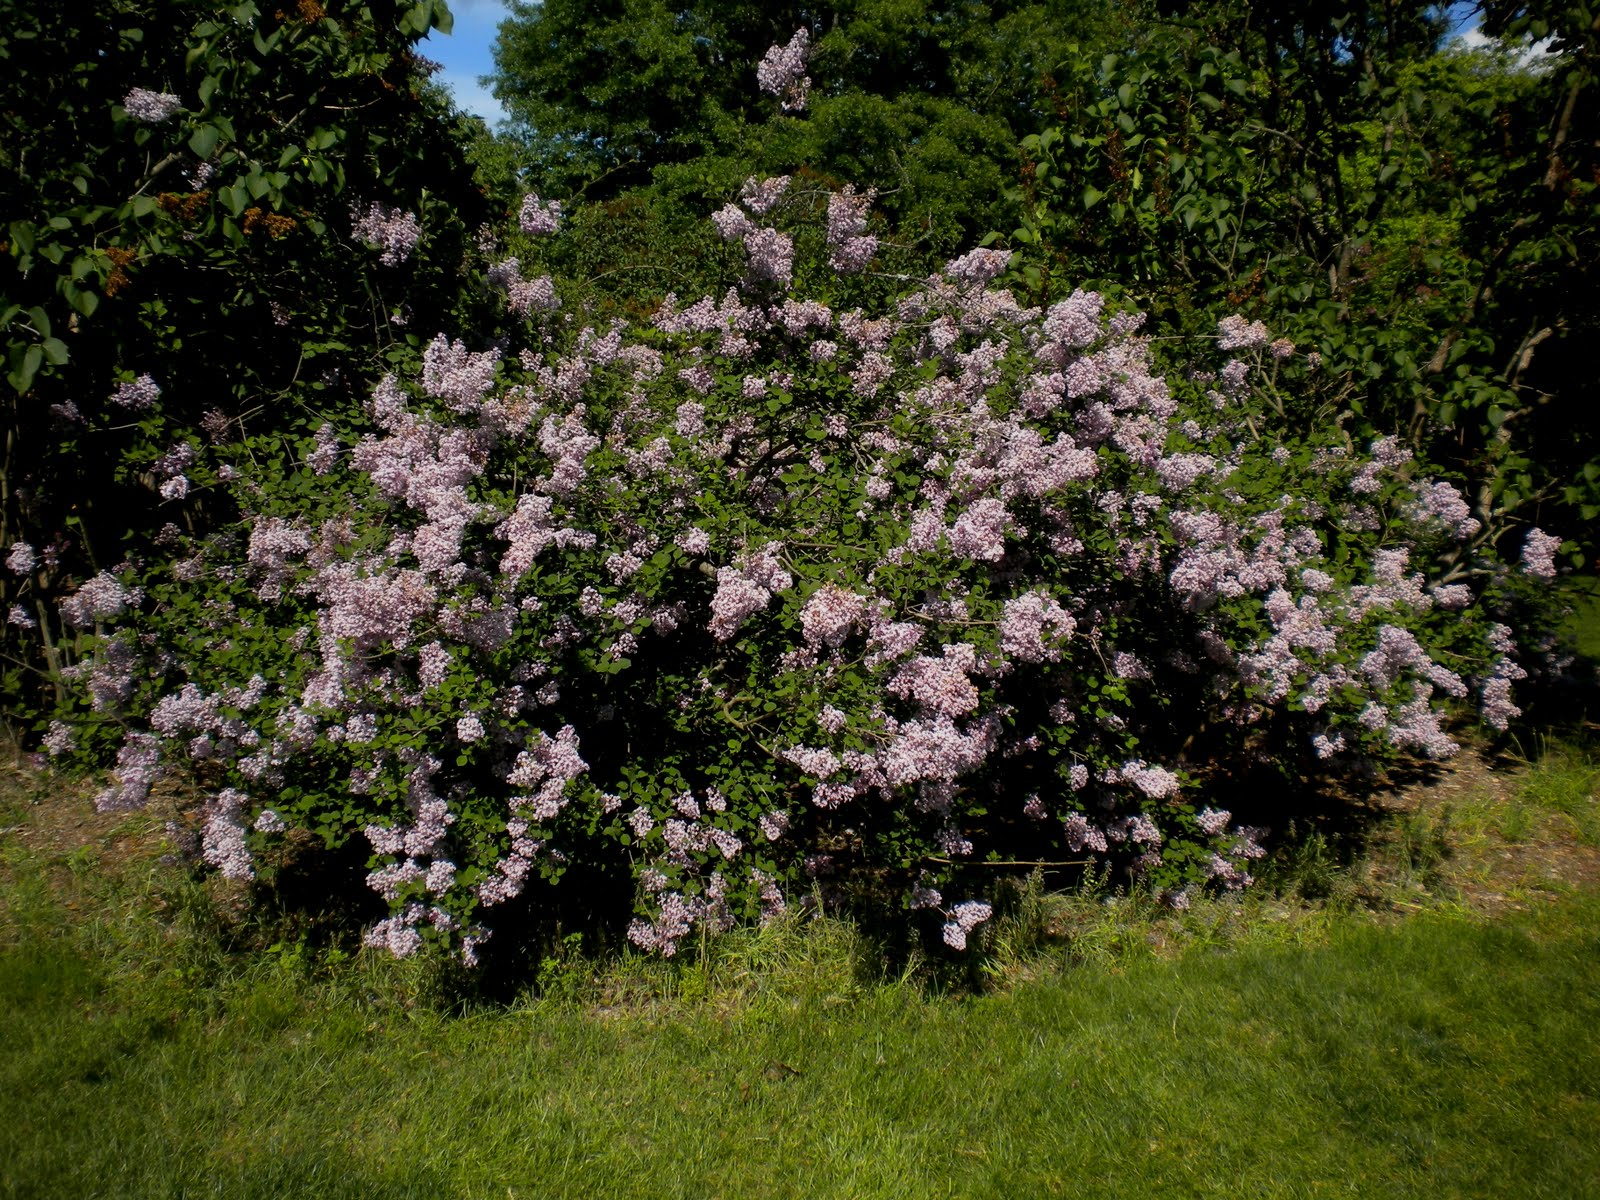  that was a lilac meadow I love lilacs and the smell is intoxicating